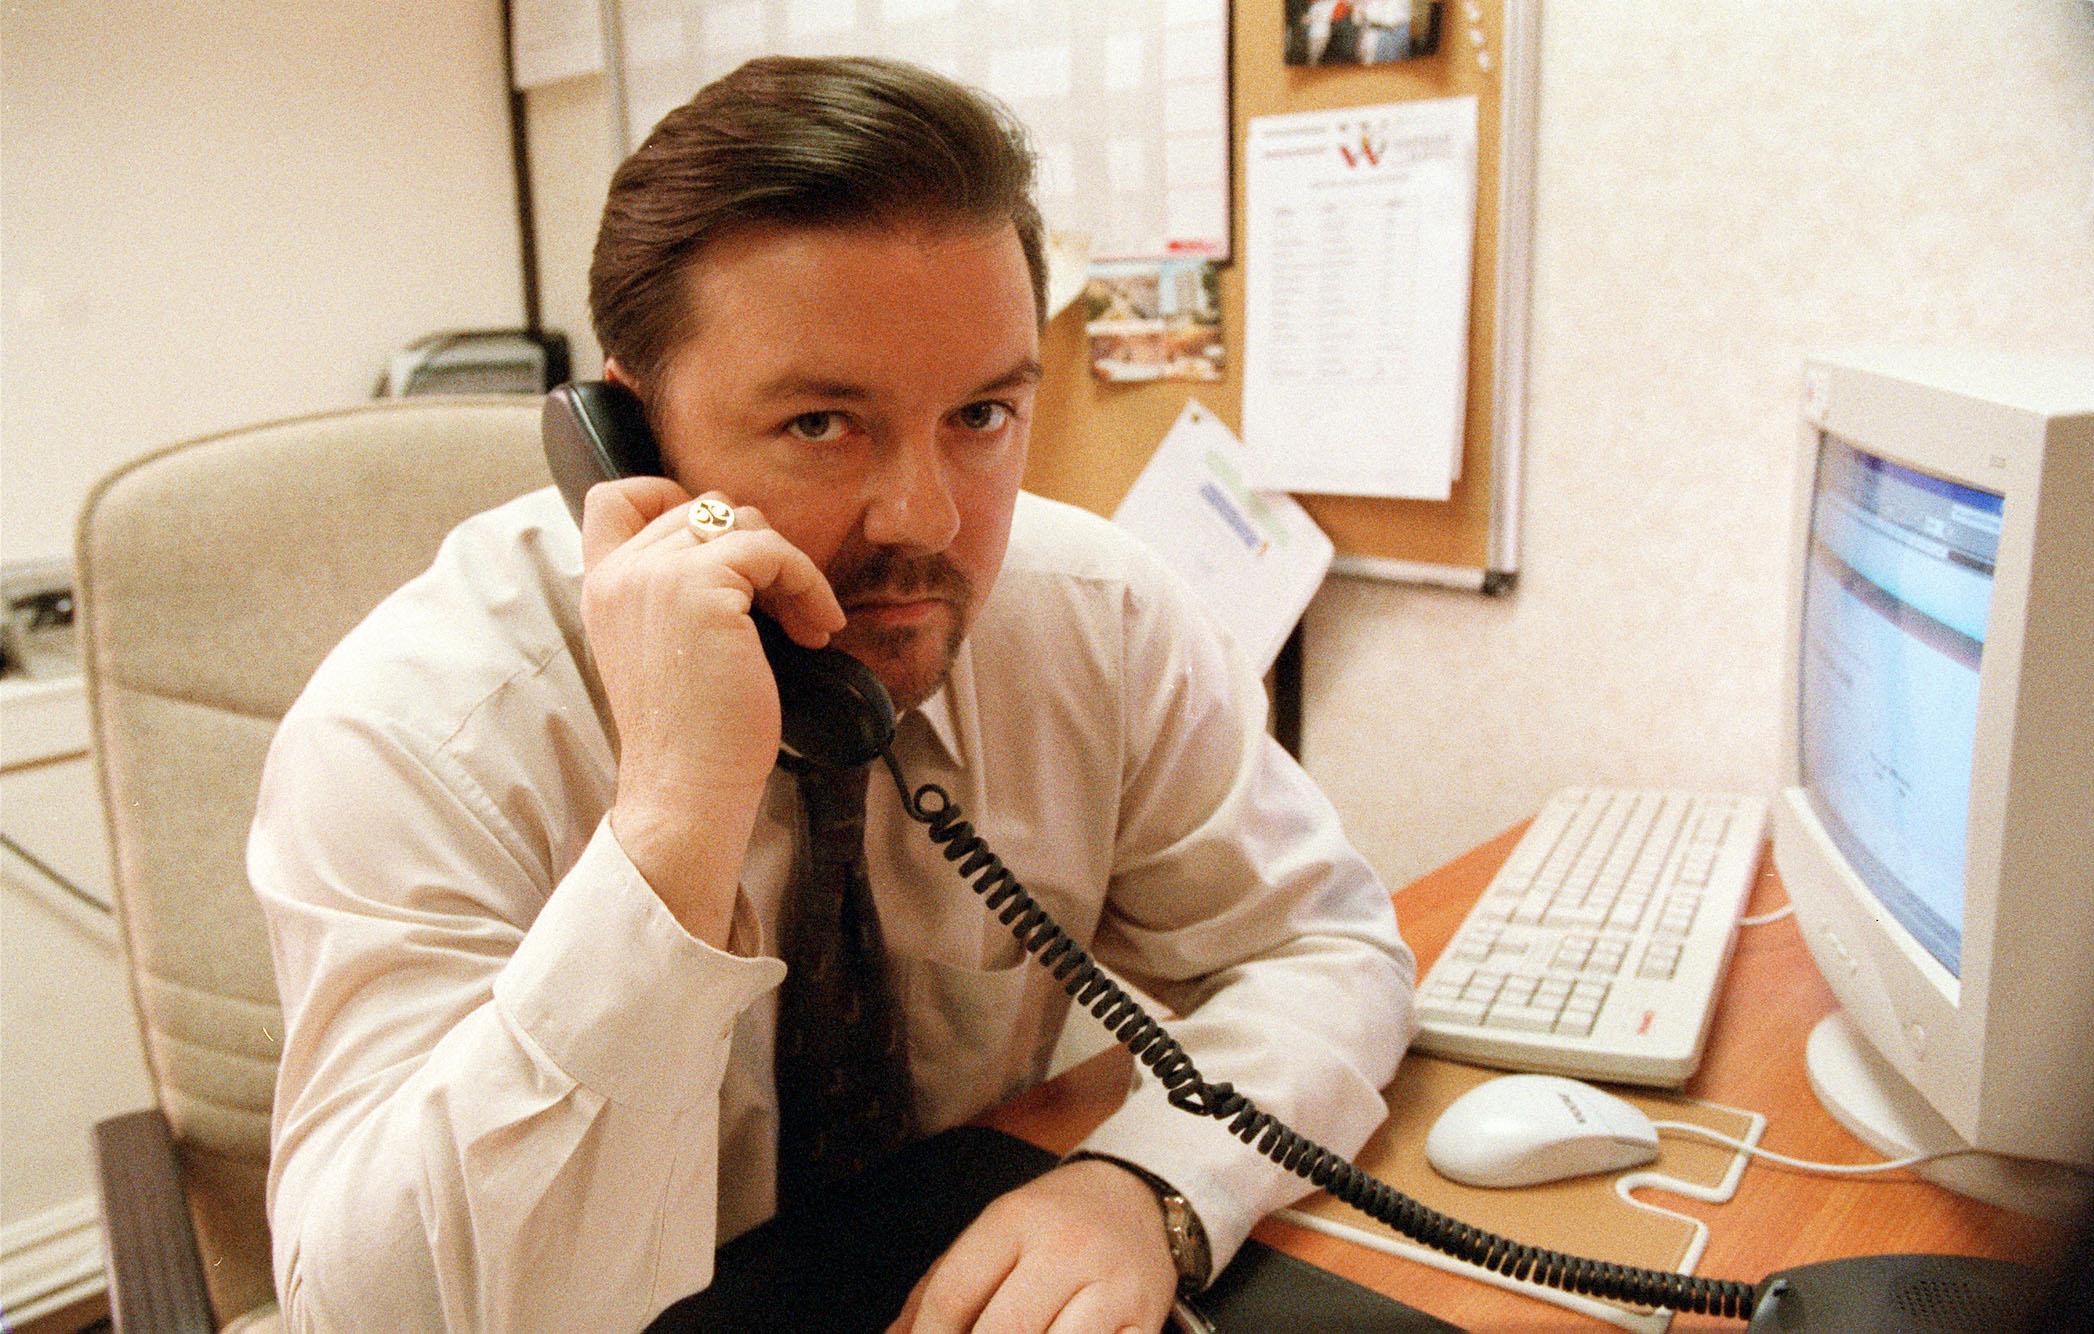 Commander in sheaf: Gervais struck gold with David Brent and ‘The Office’